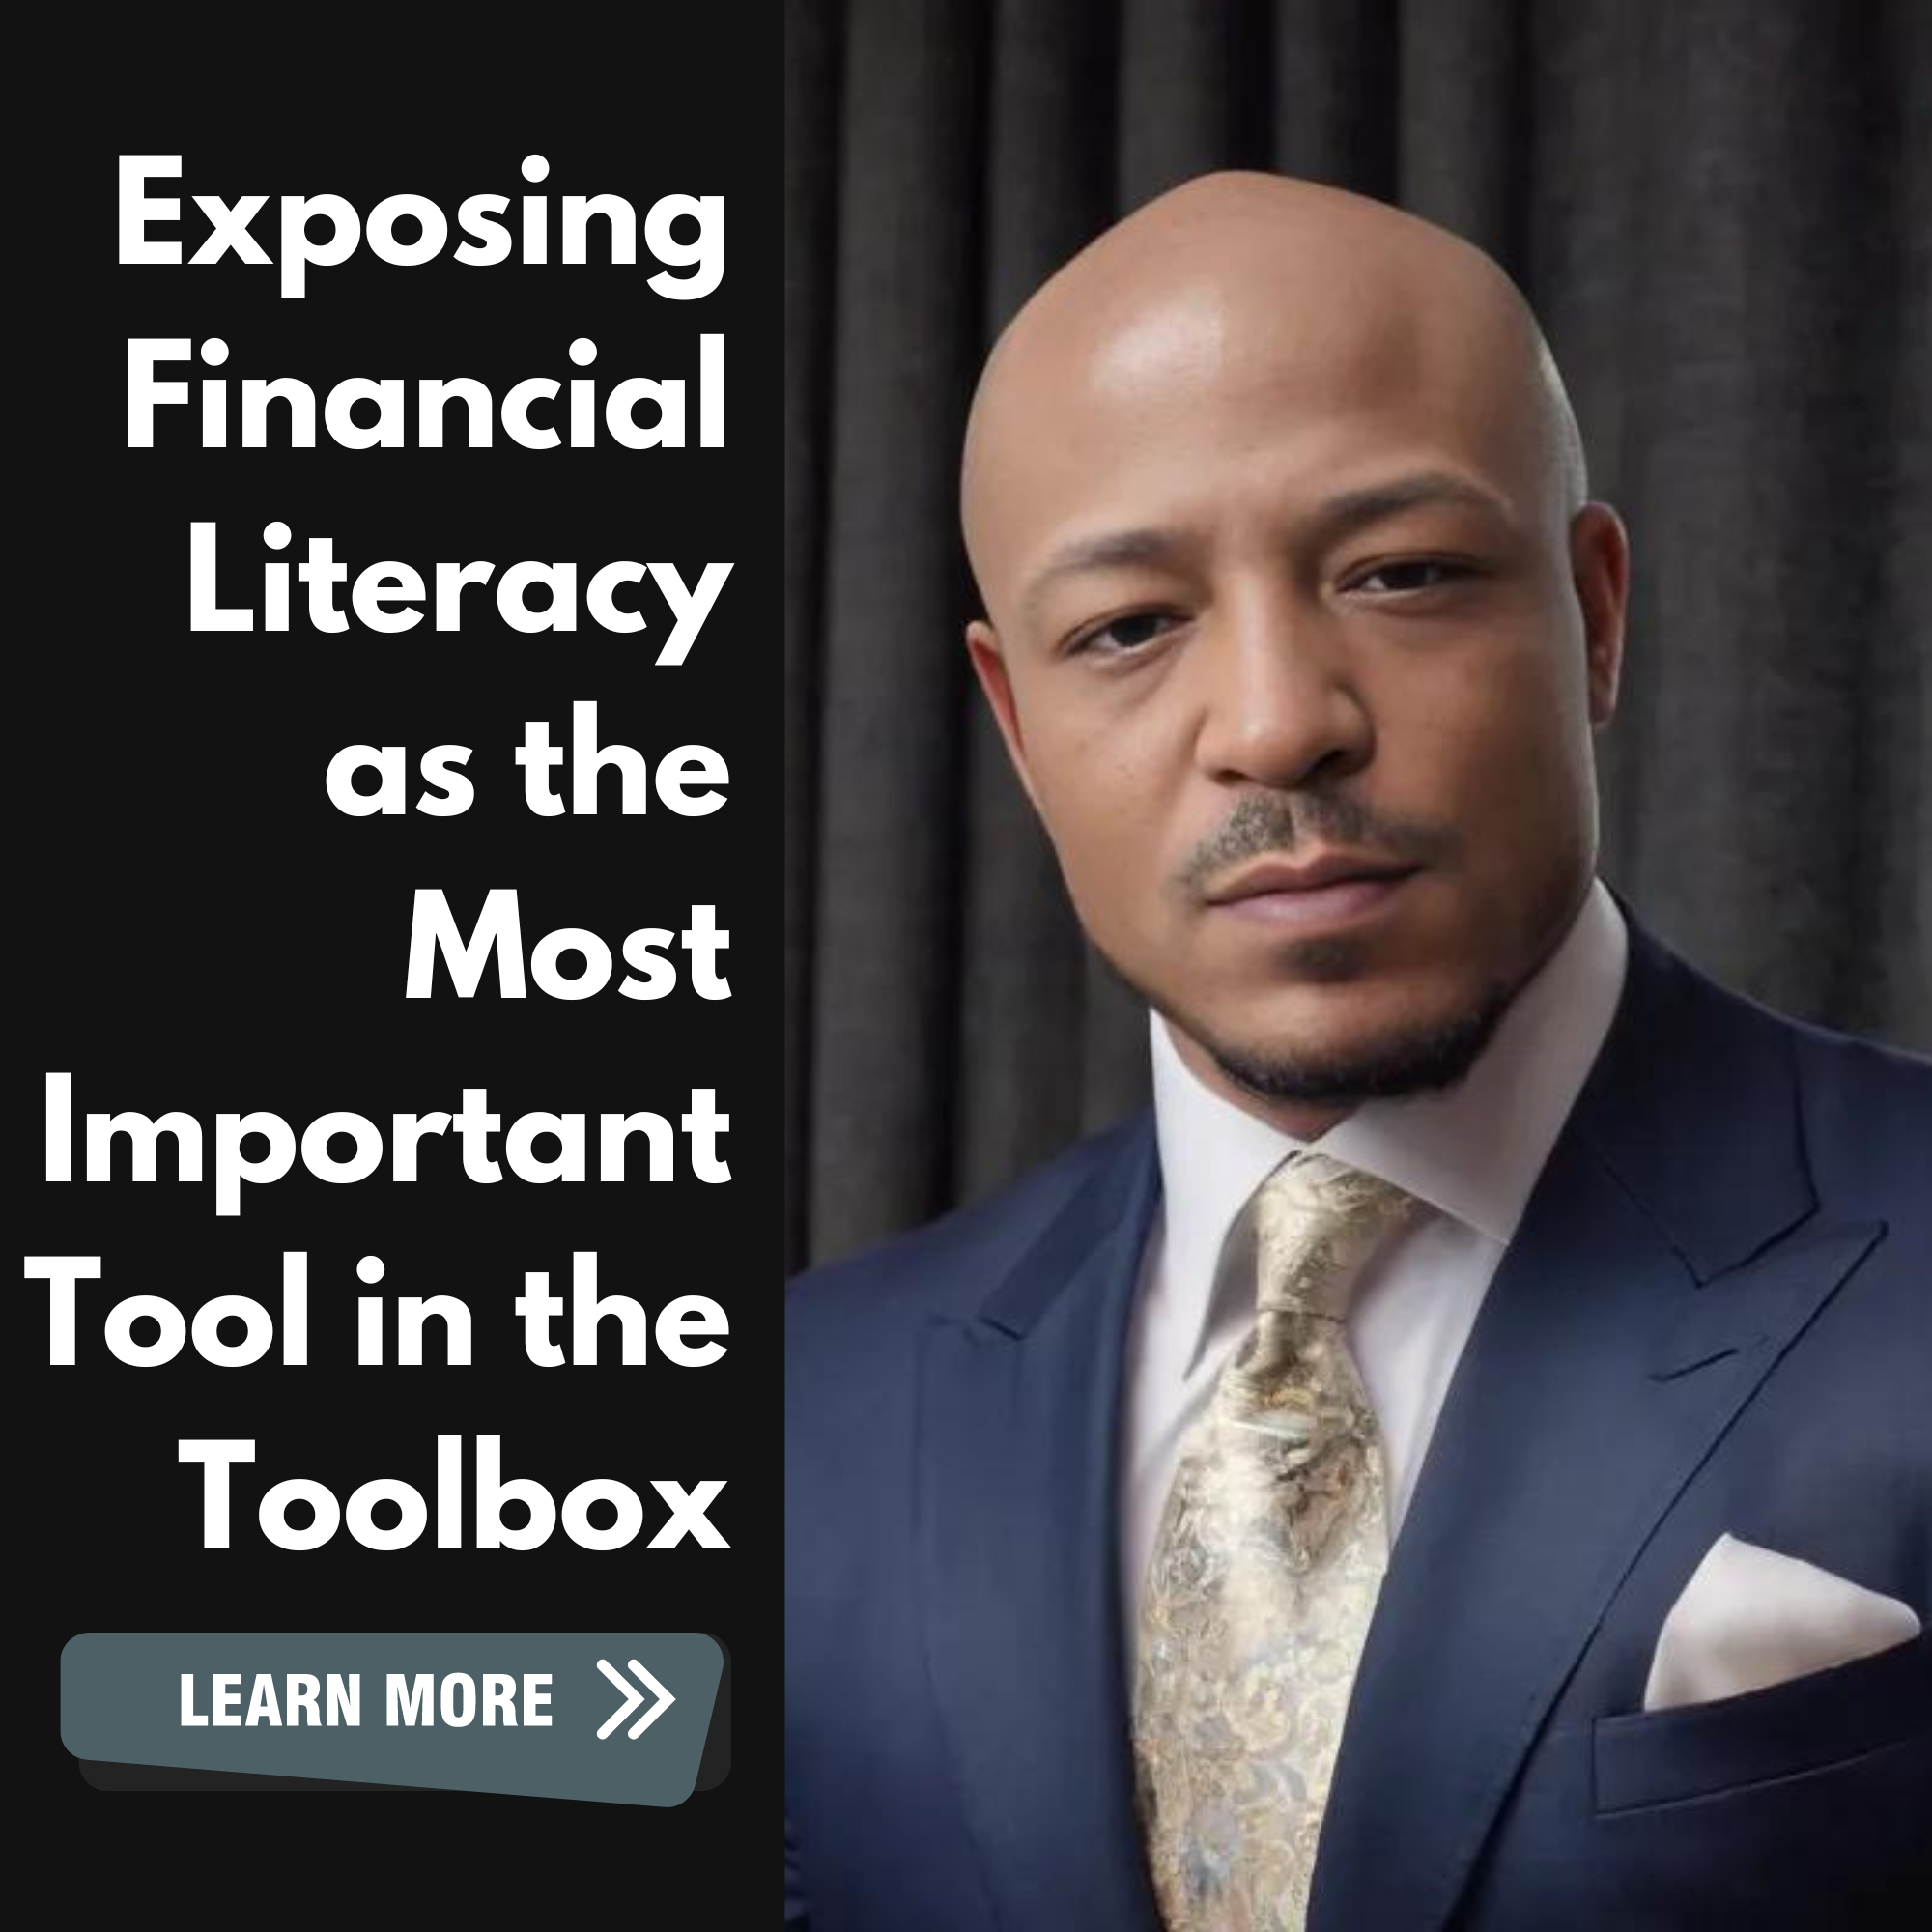 Empowering Entrepreneurs: Exposing Financial Literacy as the Most Important Tool in the Toolbox